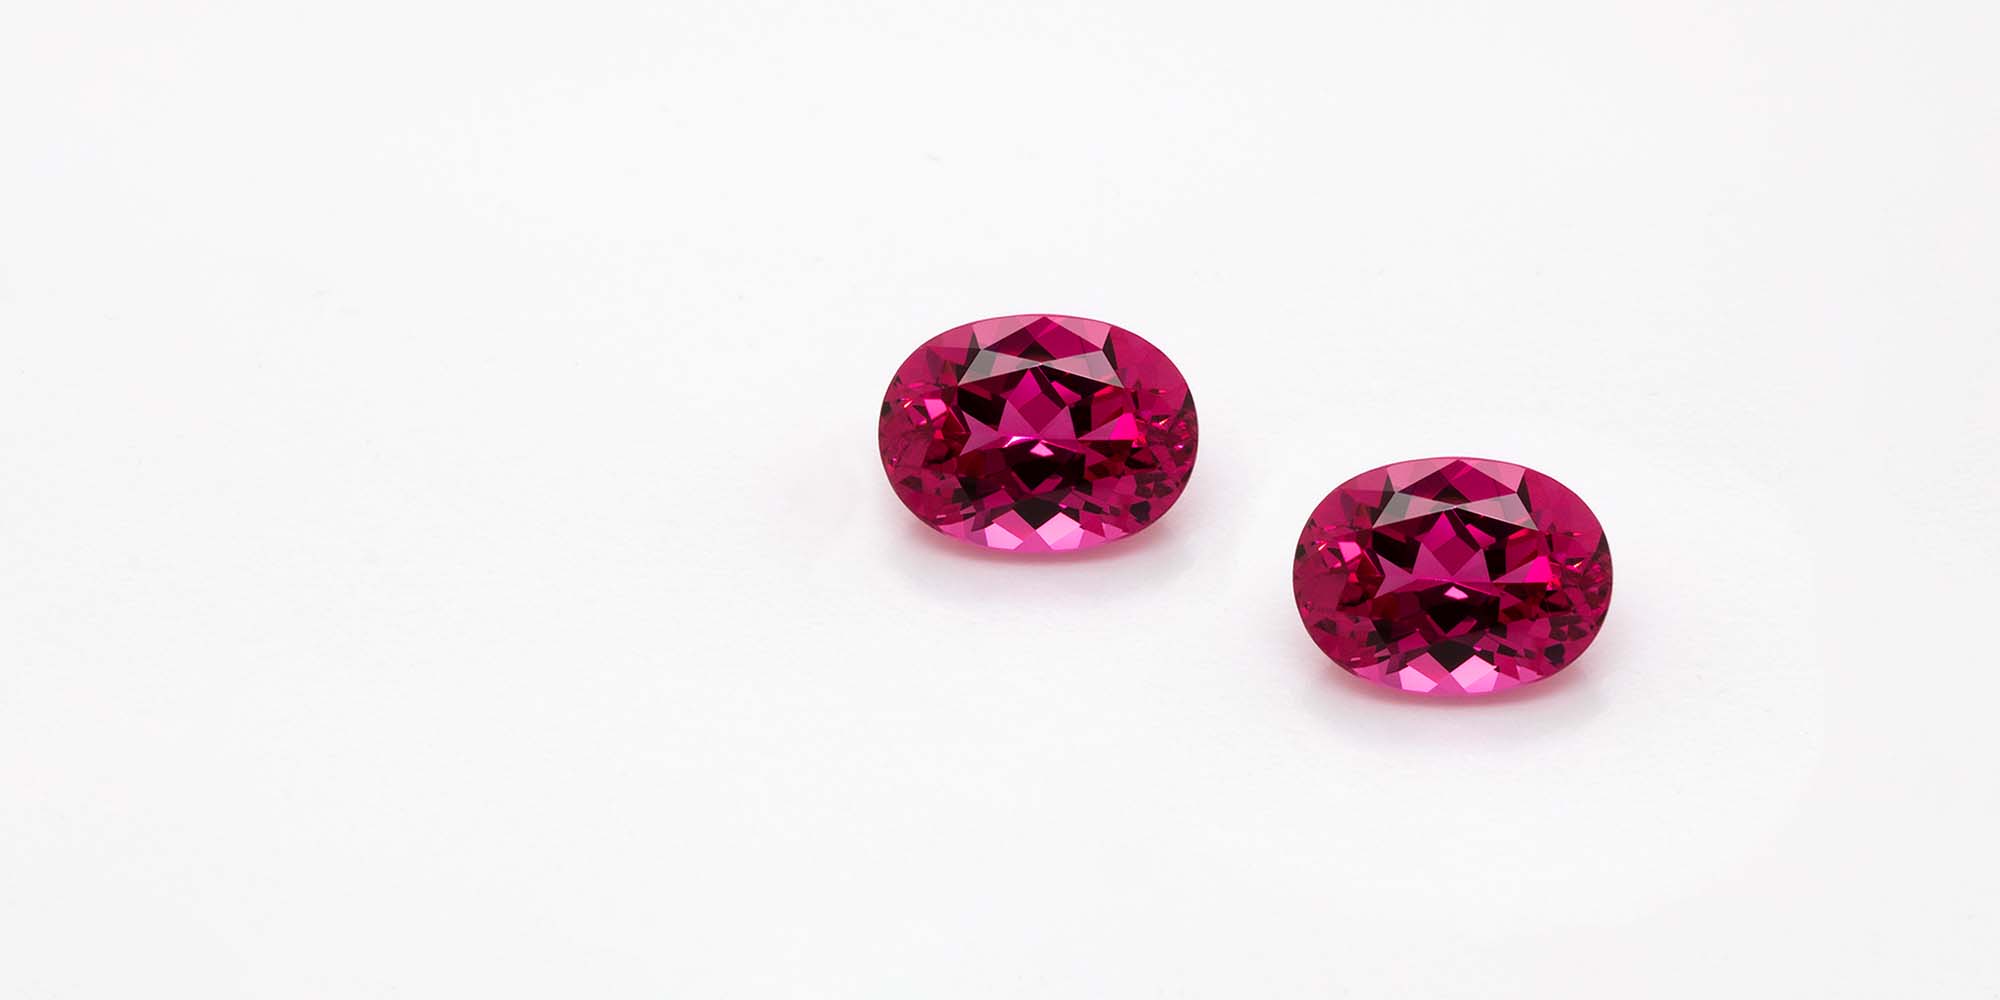 Spinel from Mahenge